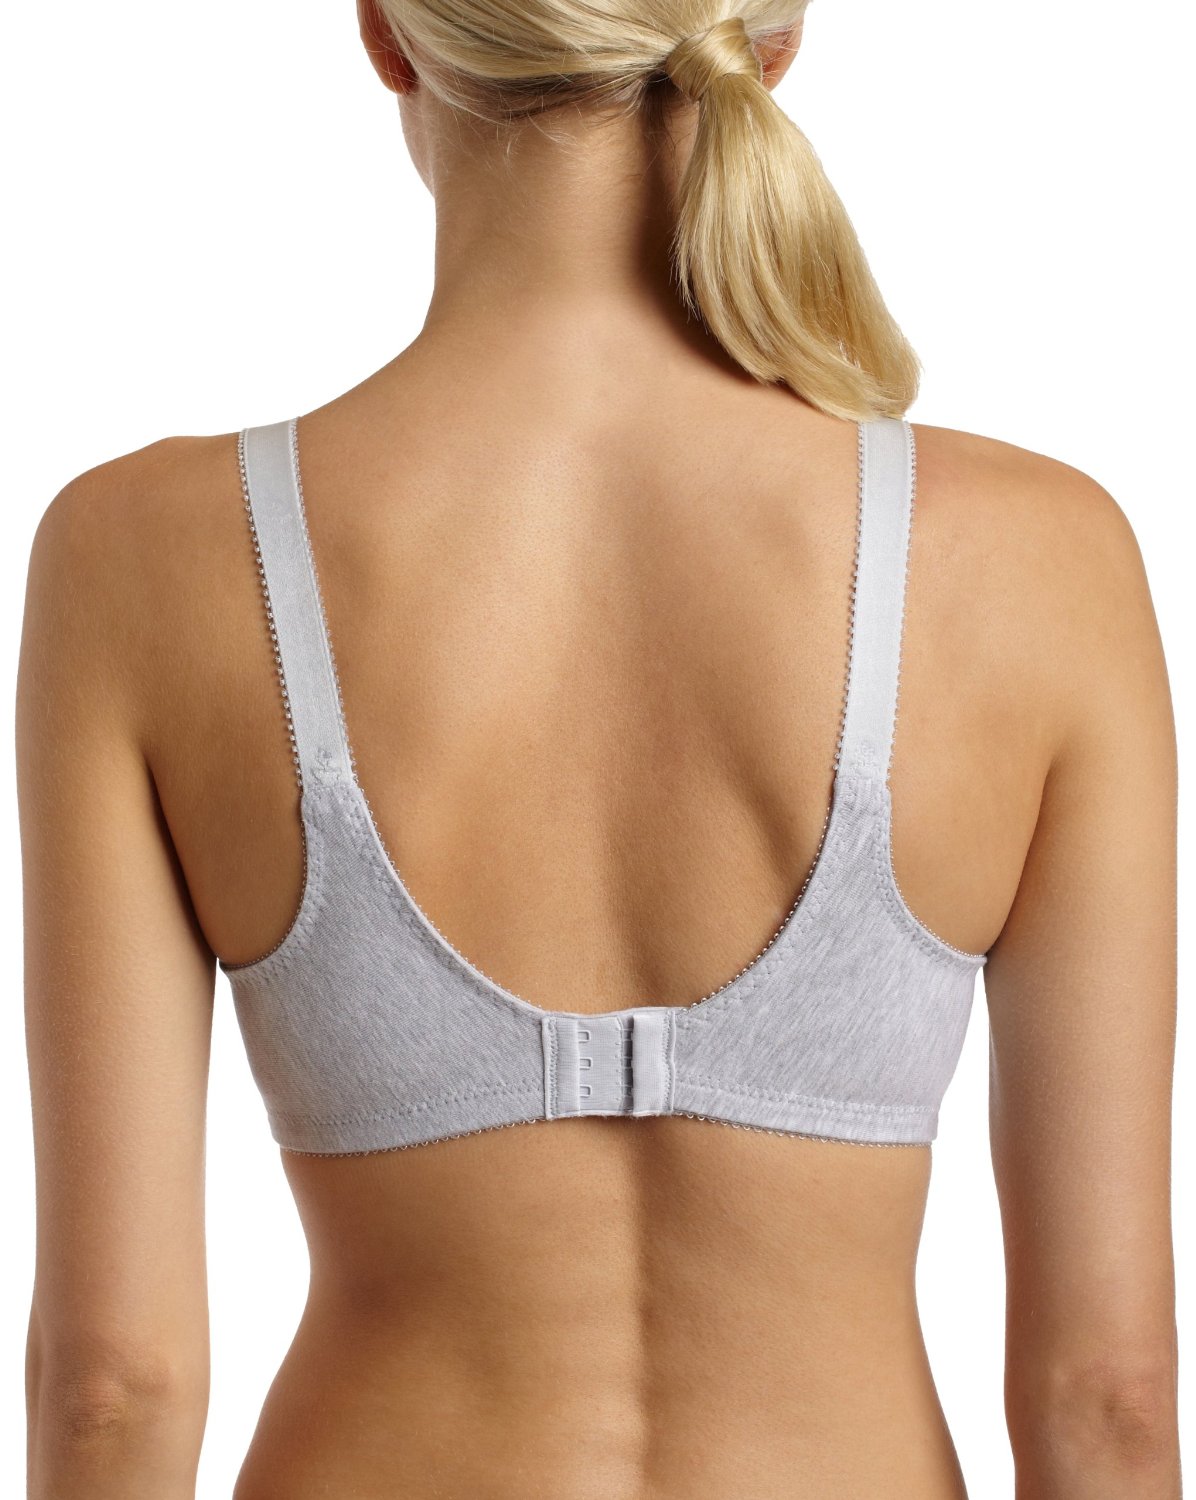 Bali Women's Double Support Cotton Wire-Free Bra - 3036 34D Soft Taupe